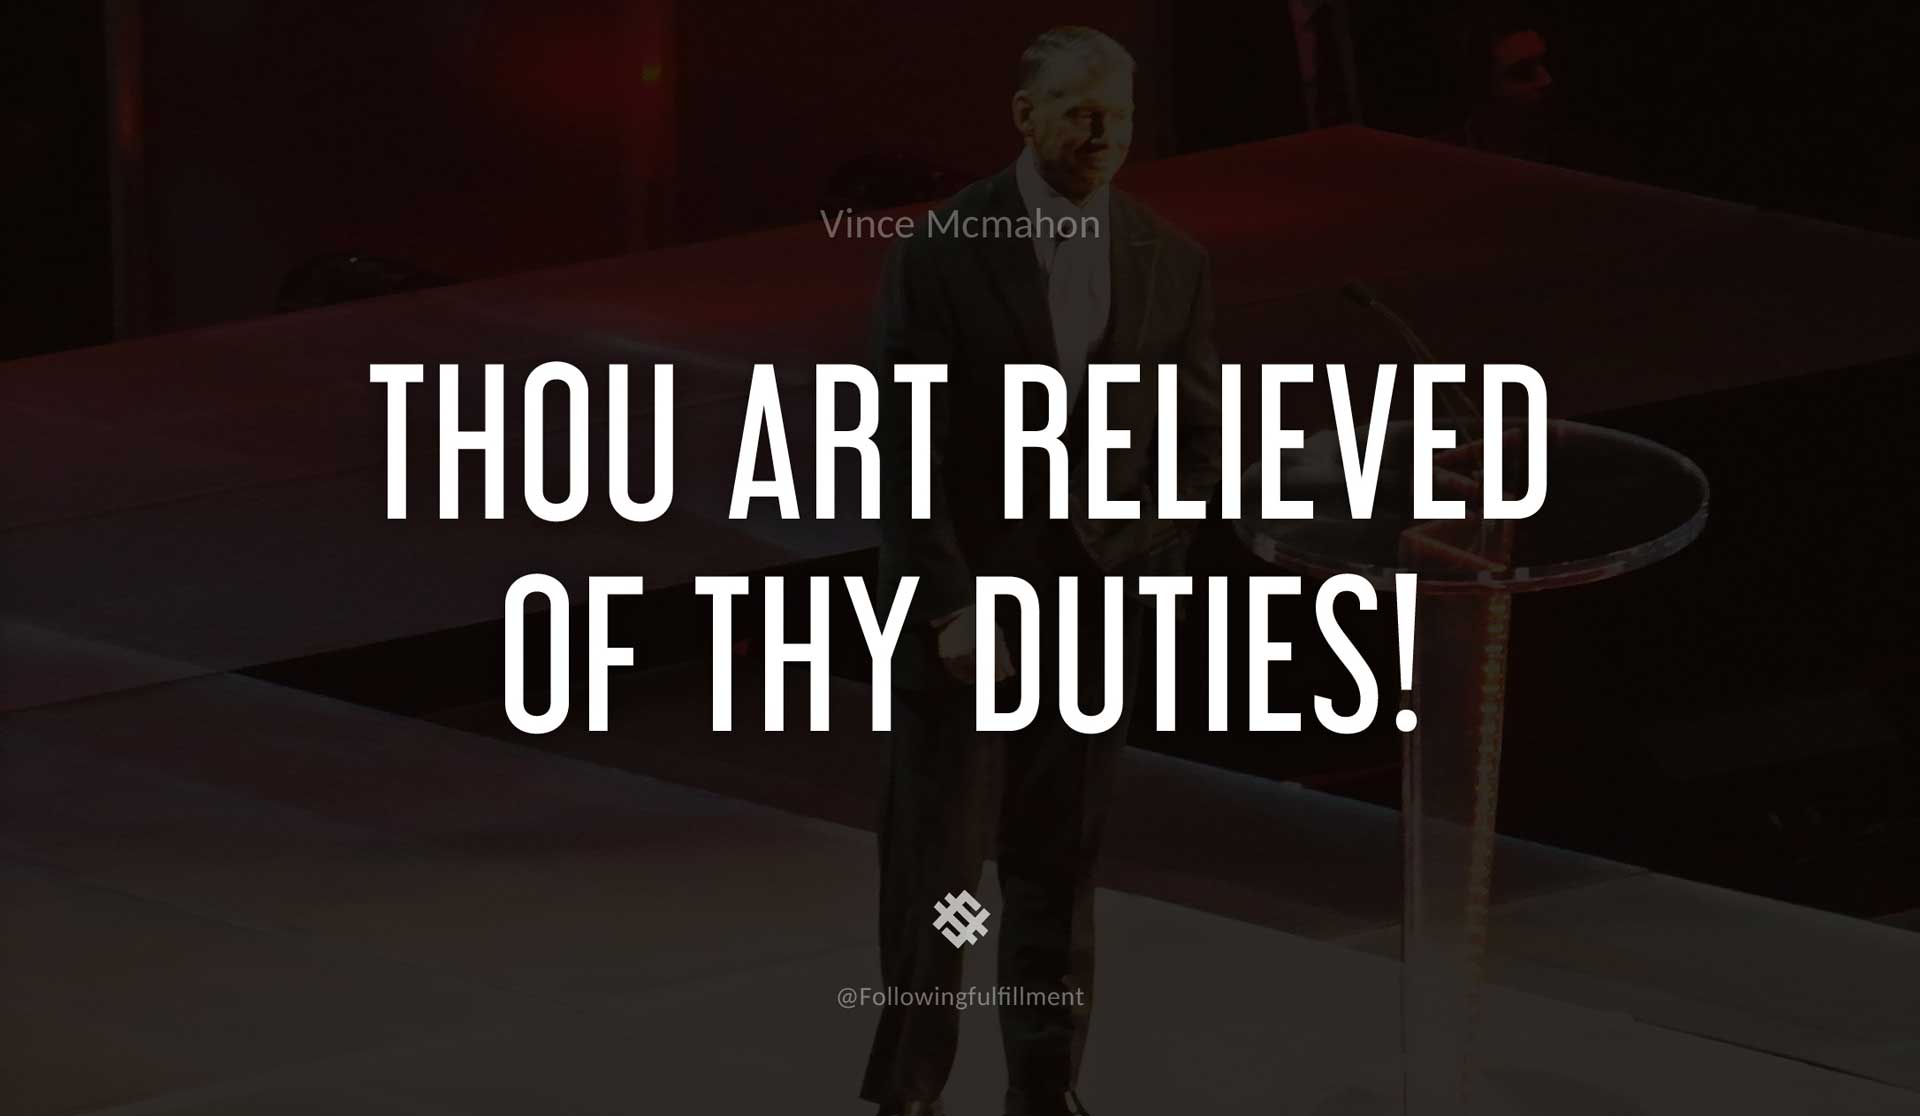 Thou-art-relieved-of-thy-duties!-VINCE-MCMAHON-Quote.jpg